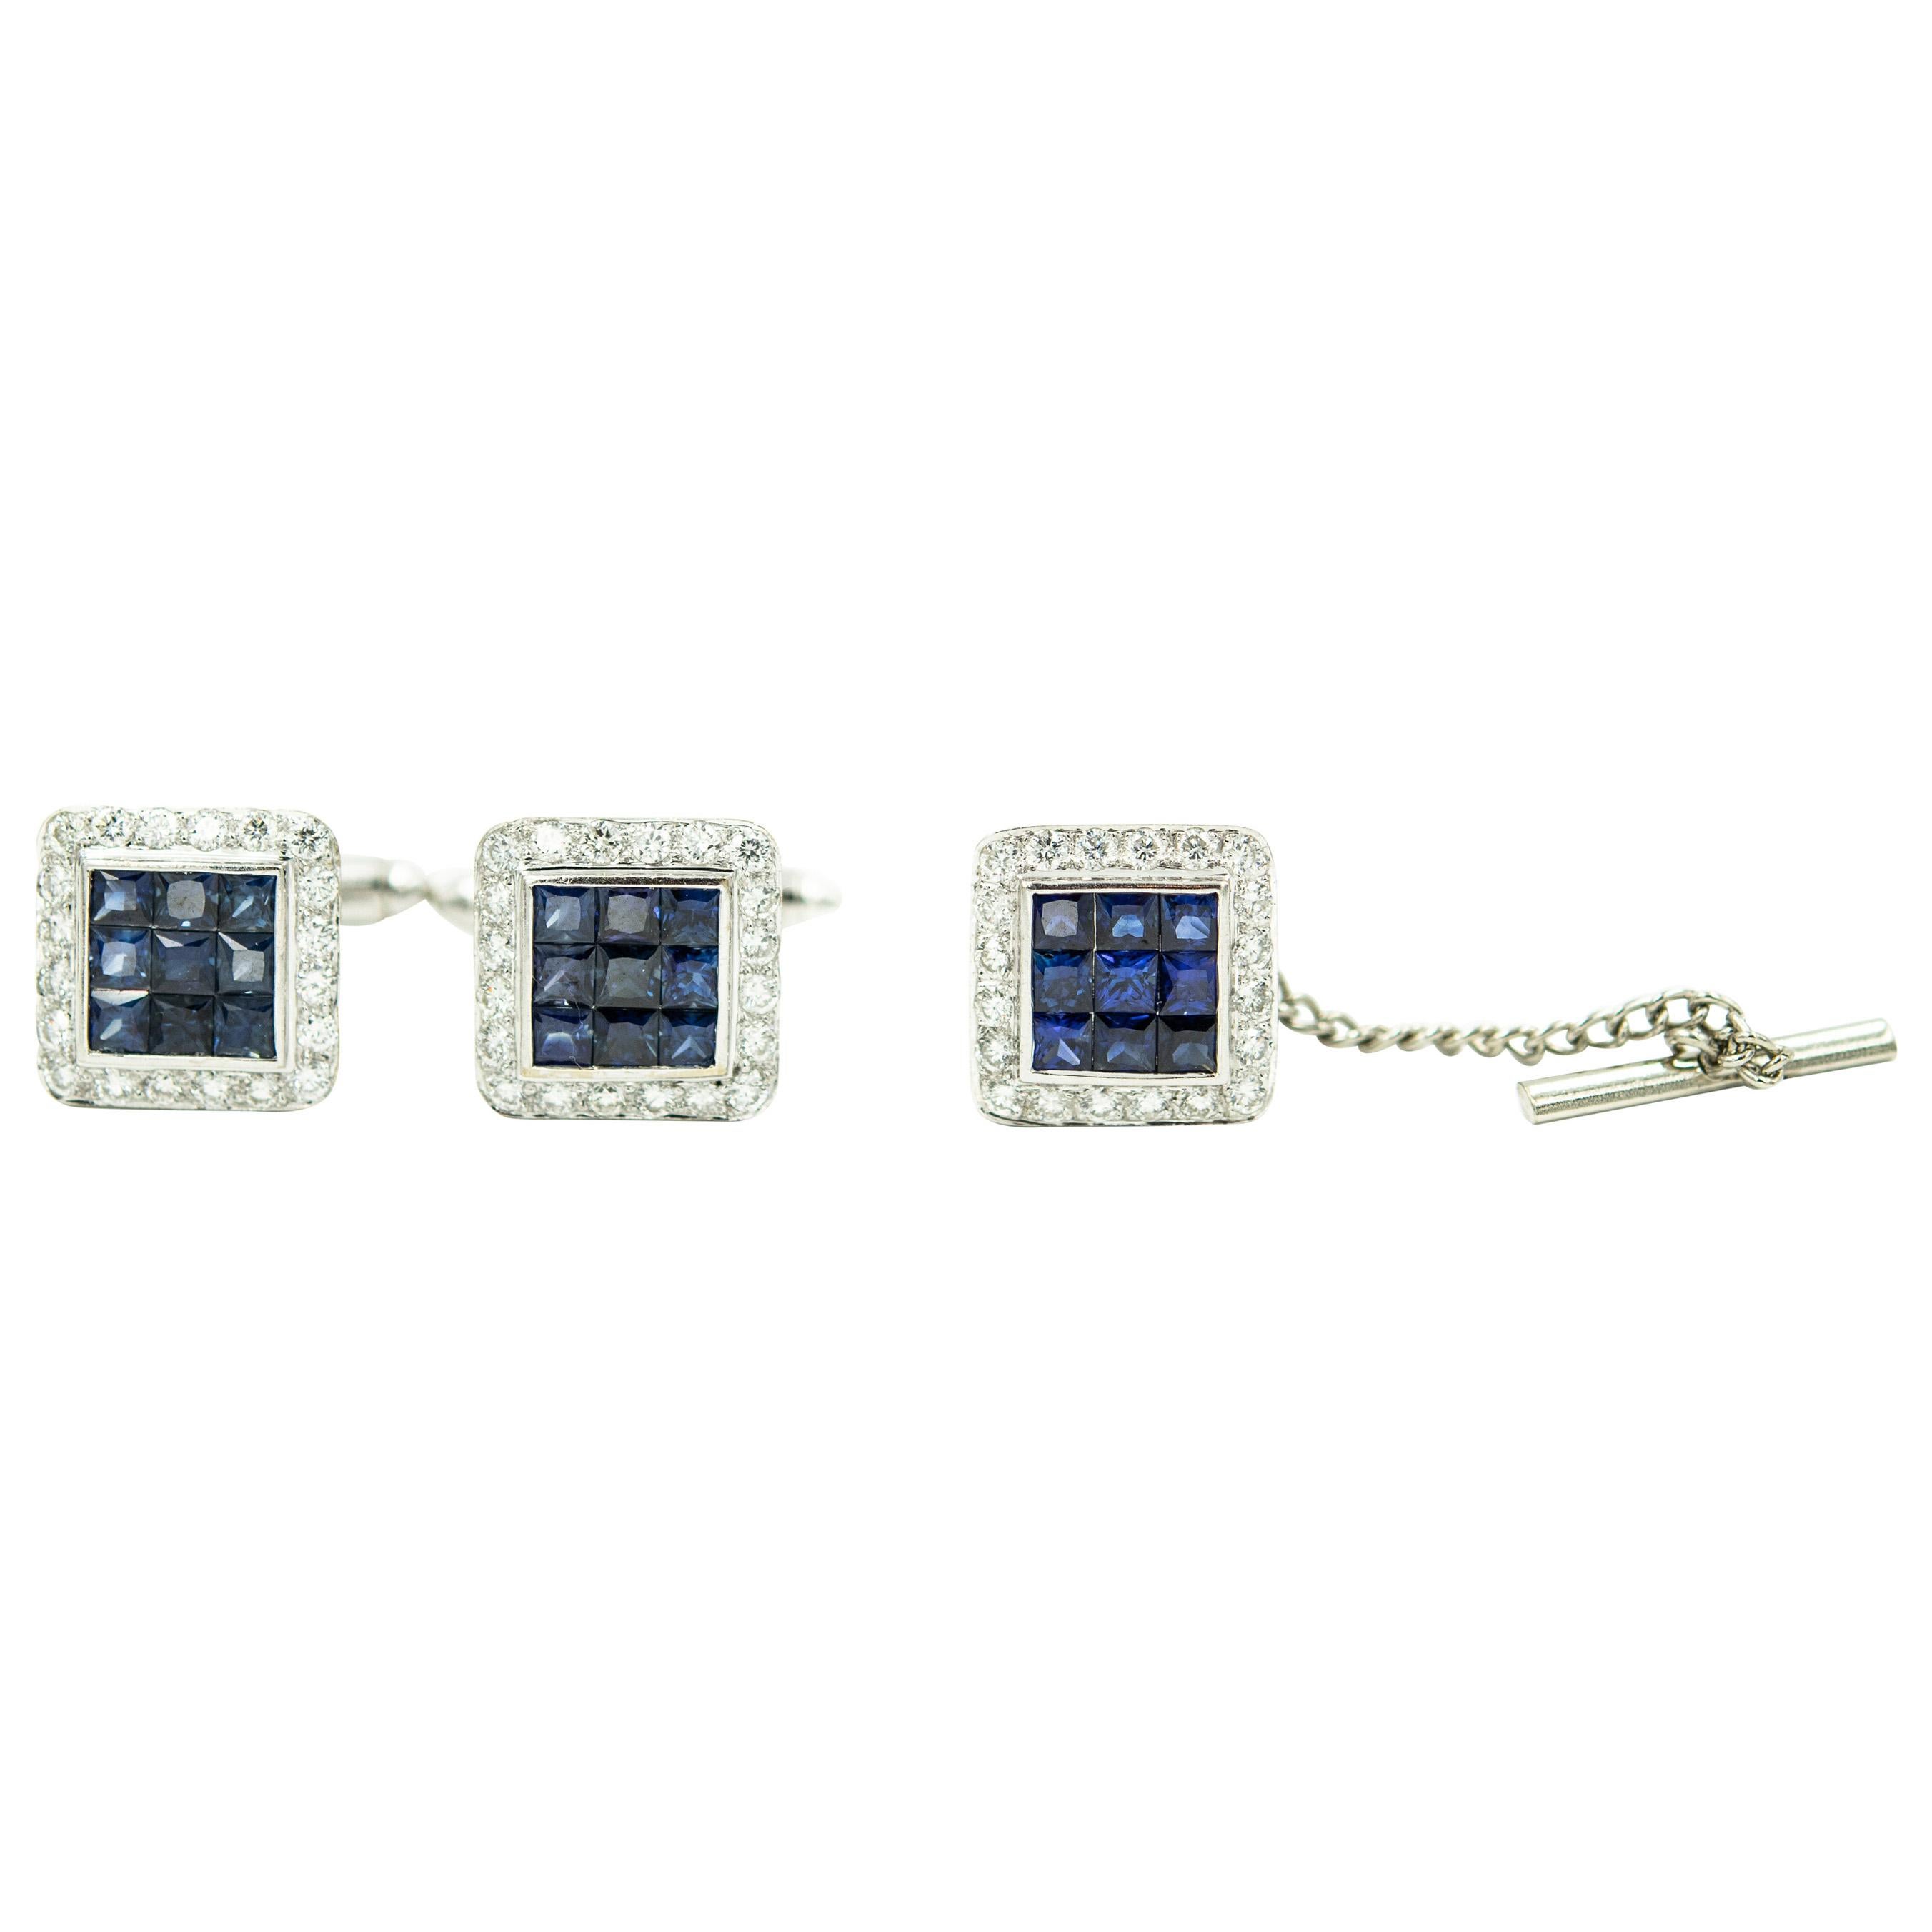 Invisibly Set Sapphires and Diamond White Gold Square Cufflinks and Tie Tac